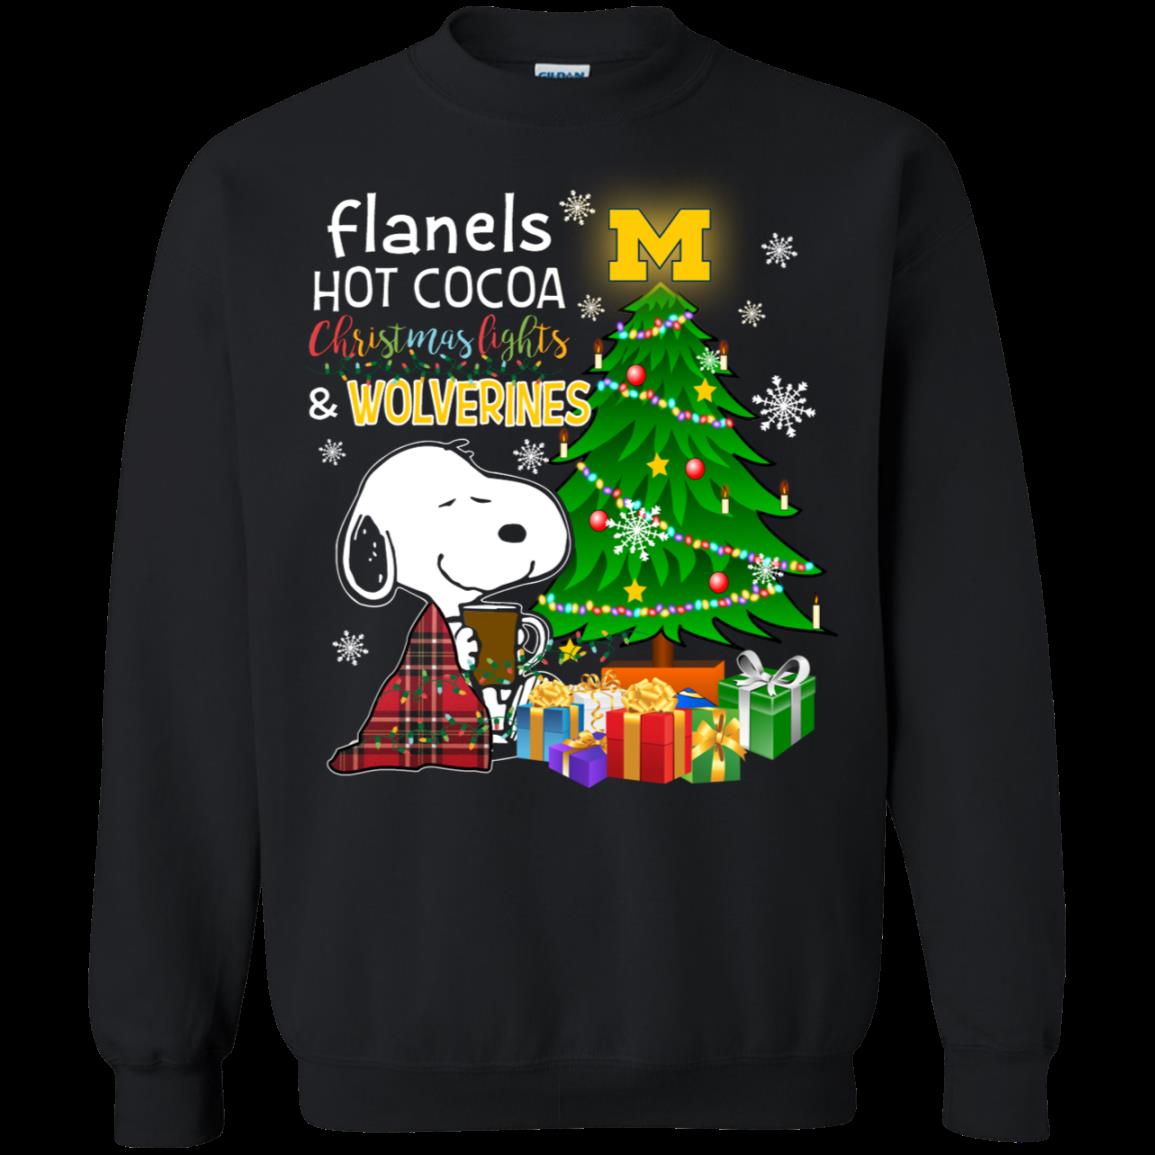 Michigan Wolverines Snoopy Ugly Christmas Sweater Flanels Hot Cocoa